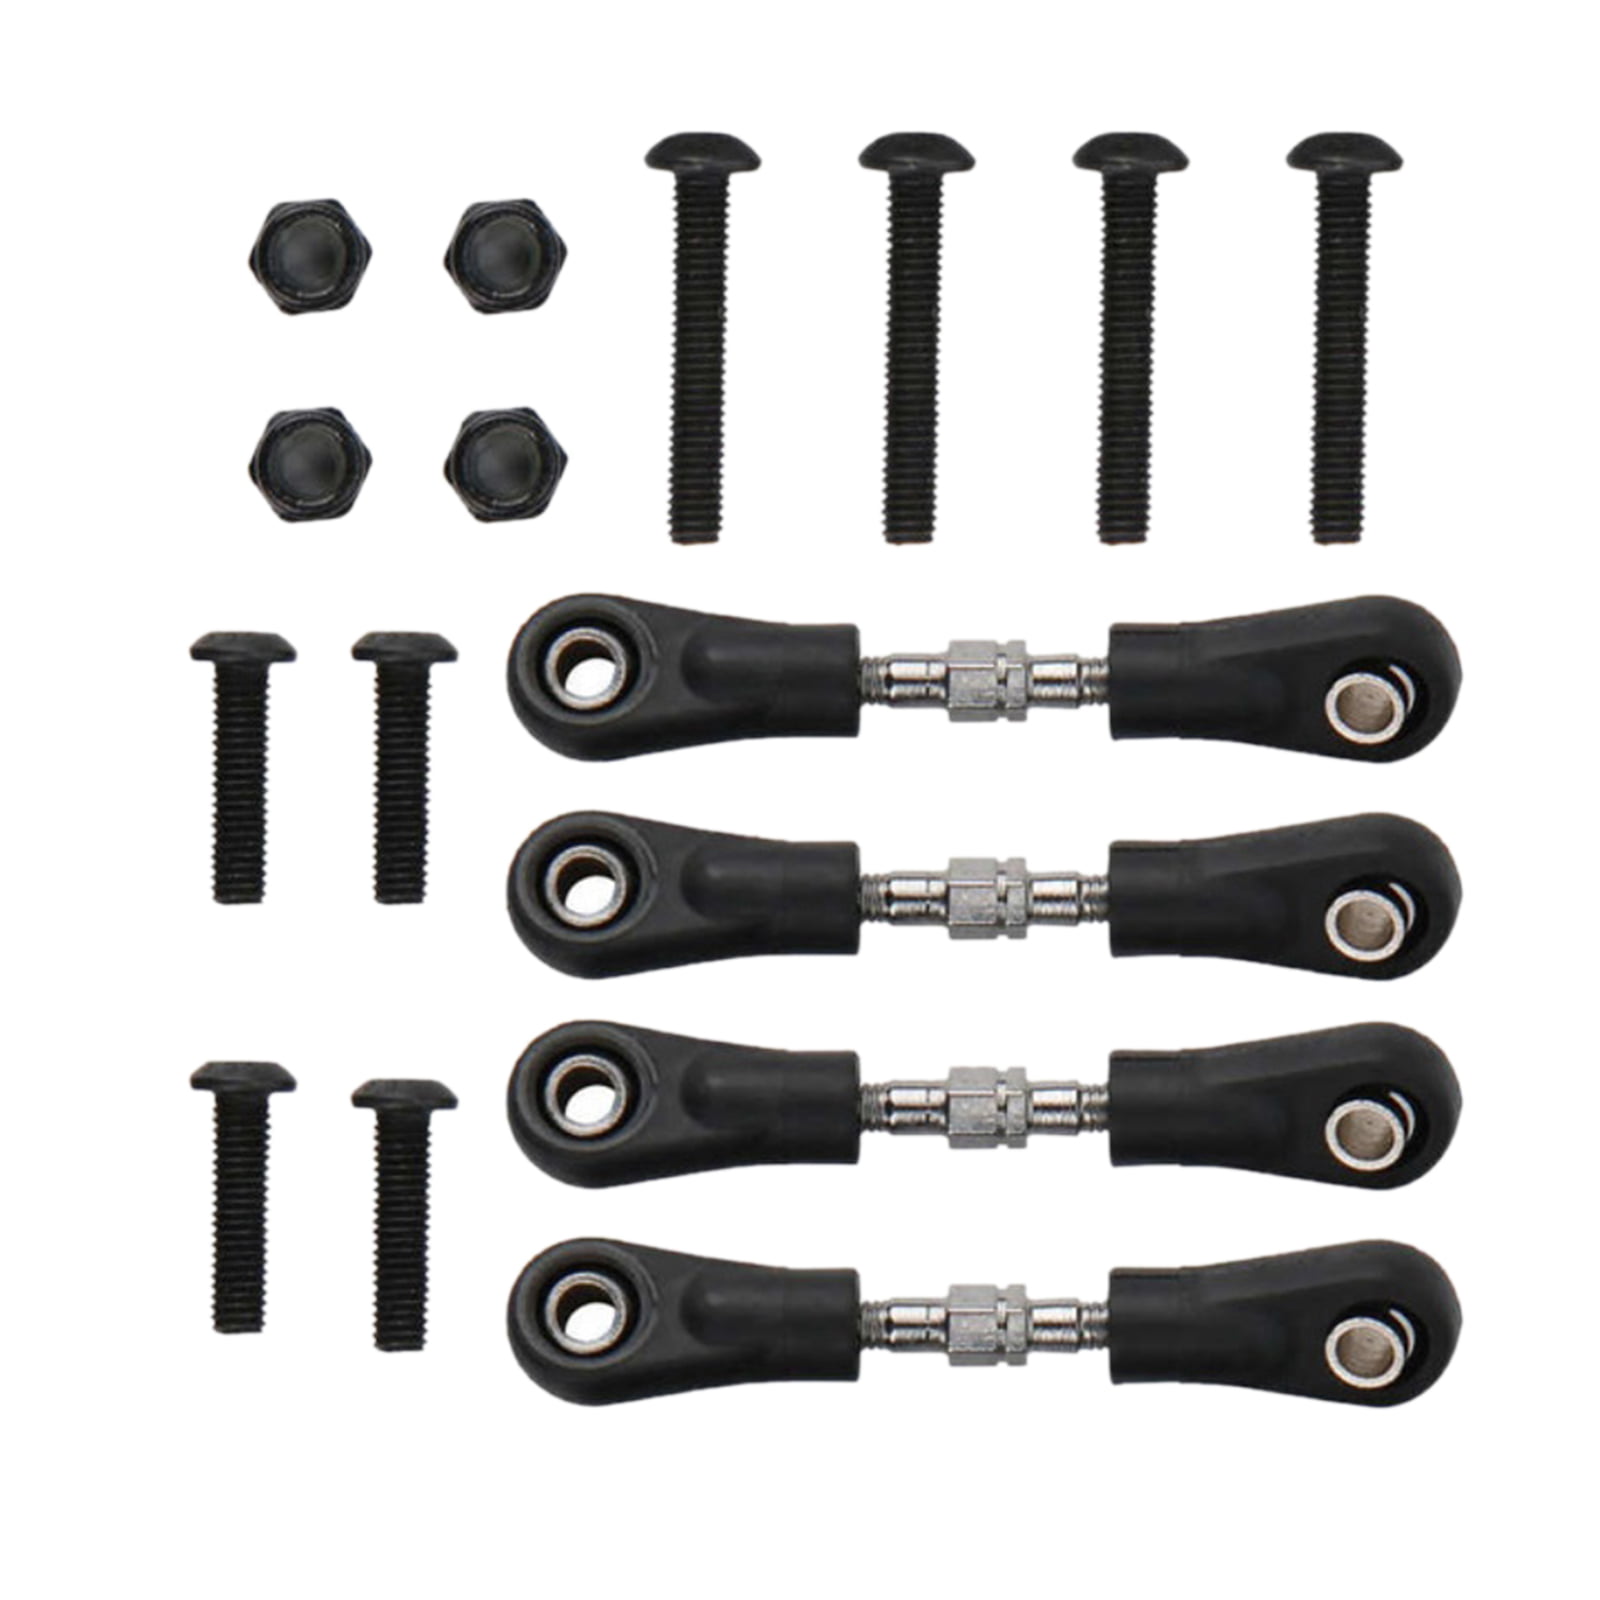 4x RC Car Adjustable Steering Rod Parts with Screws Nuts 1:10 Scale RC Car 